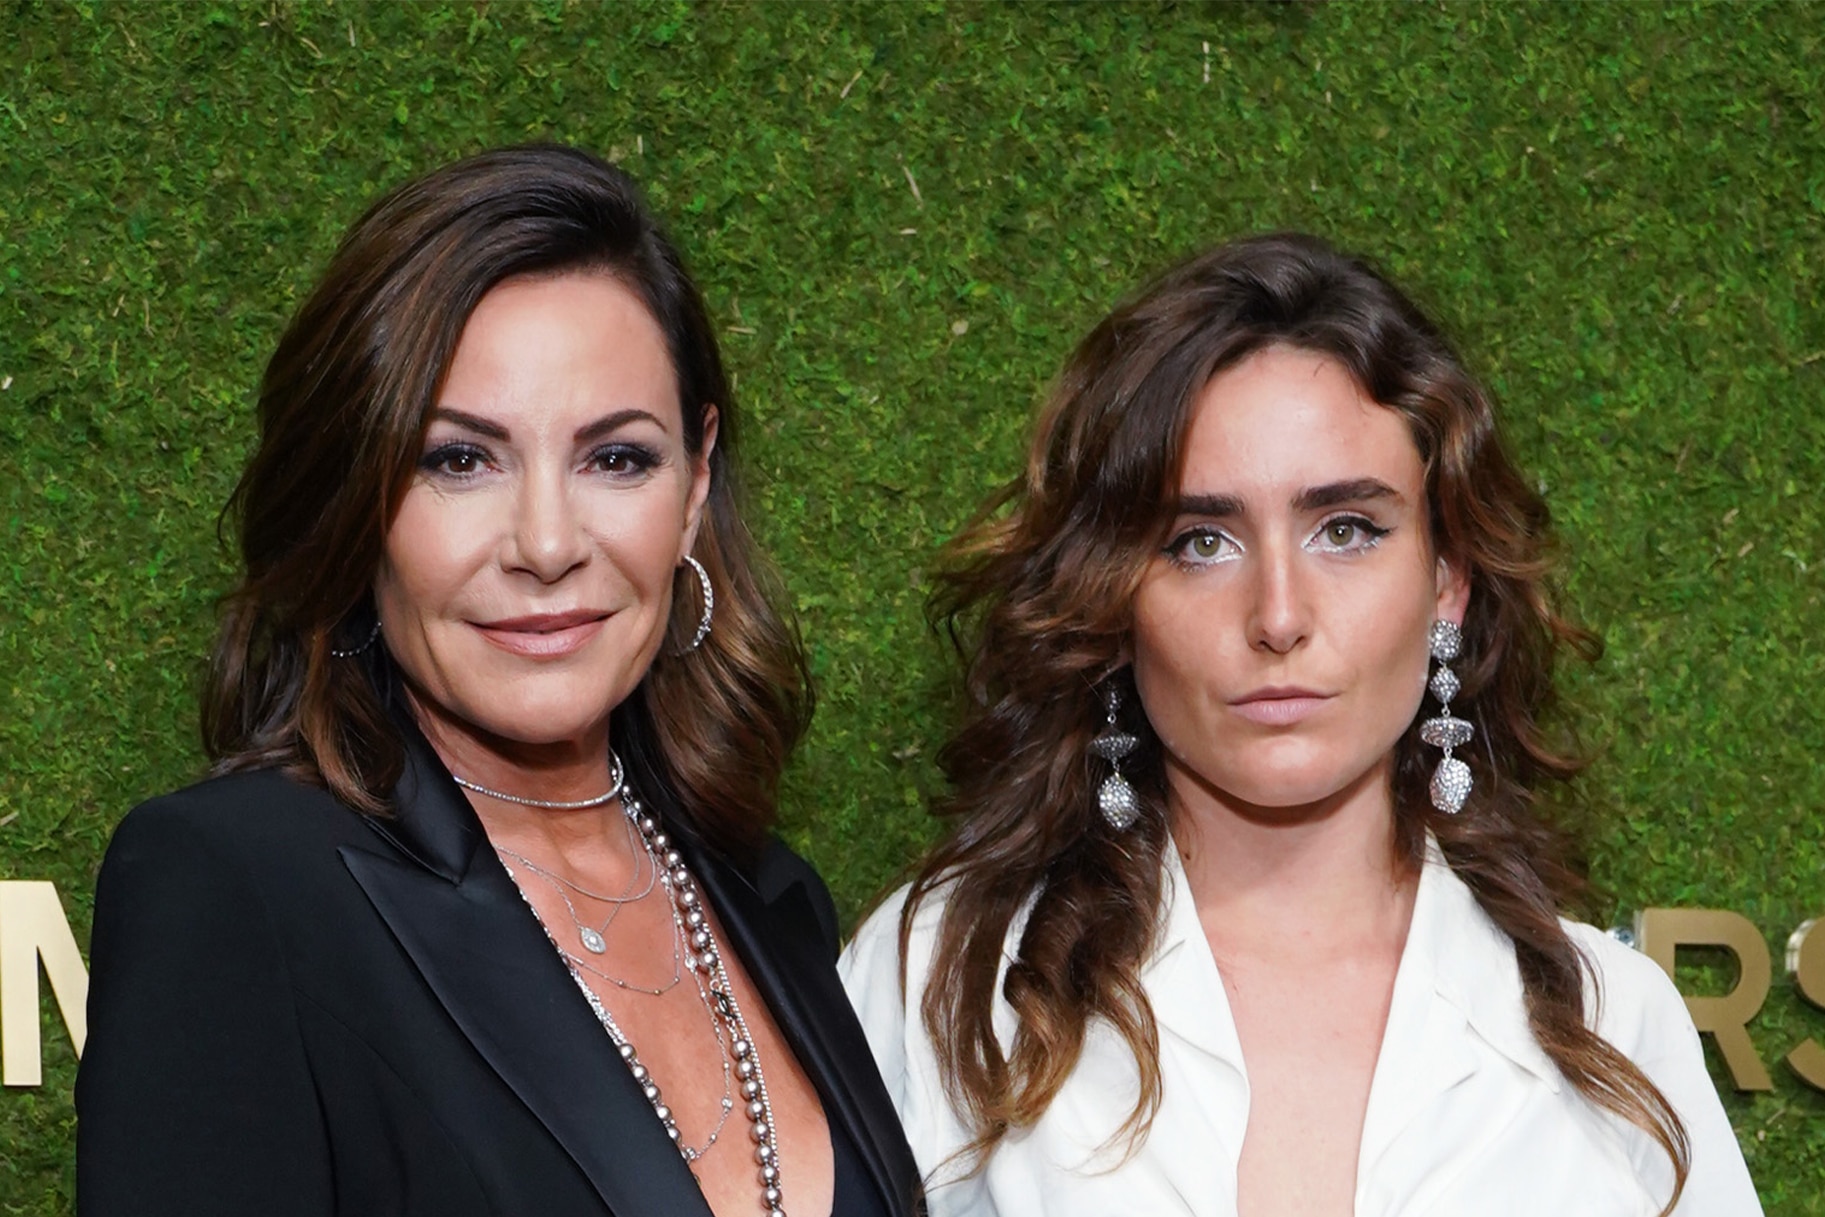 RHONY star Luann de Lesseps says she dated former Mets player